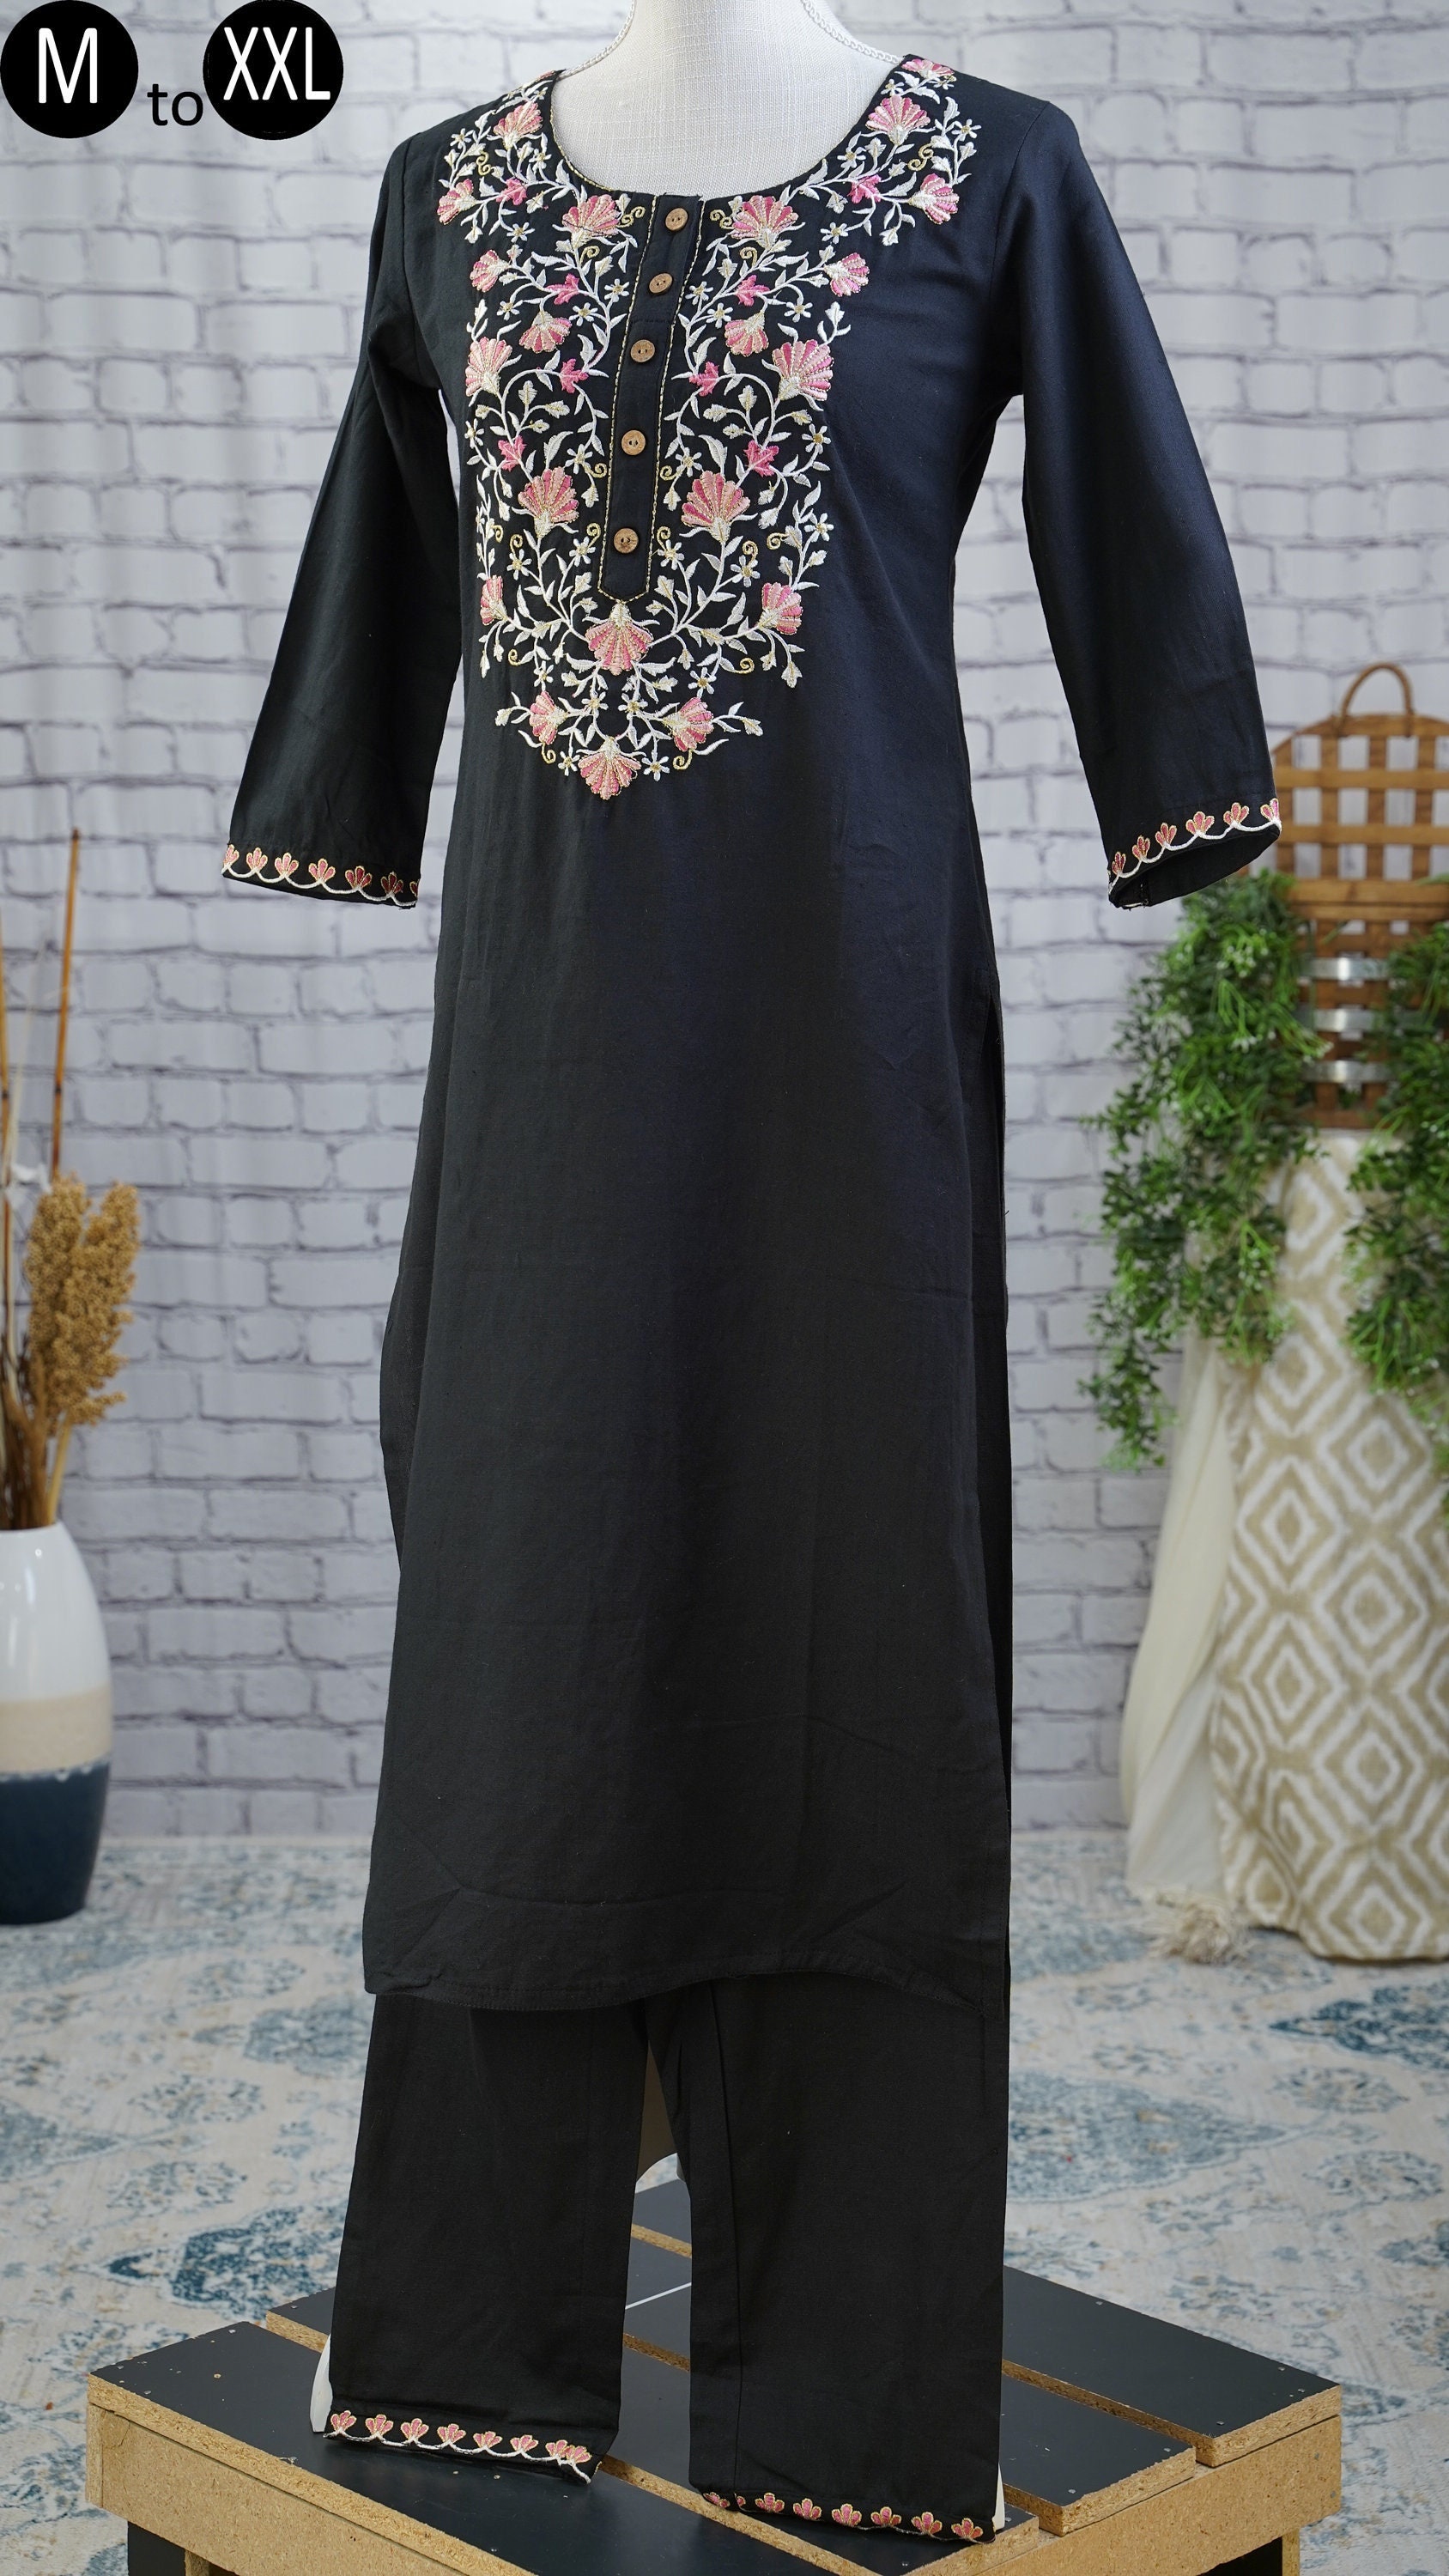 batti bala clothing Women Fit and Flare Black Dress - Buy batti bala  clothing Women Fit and Flare Black Dress Online at Best Prices in India |  Flipkart.com